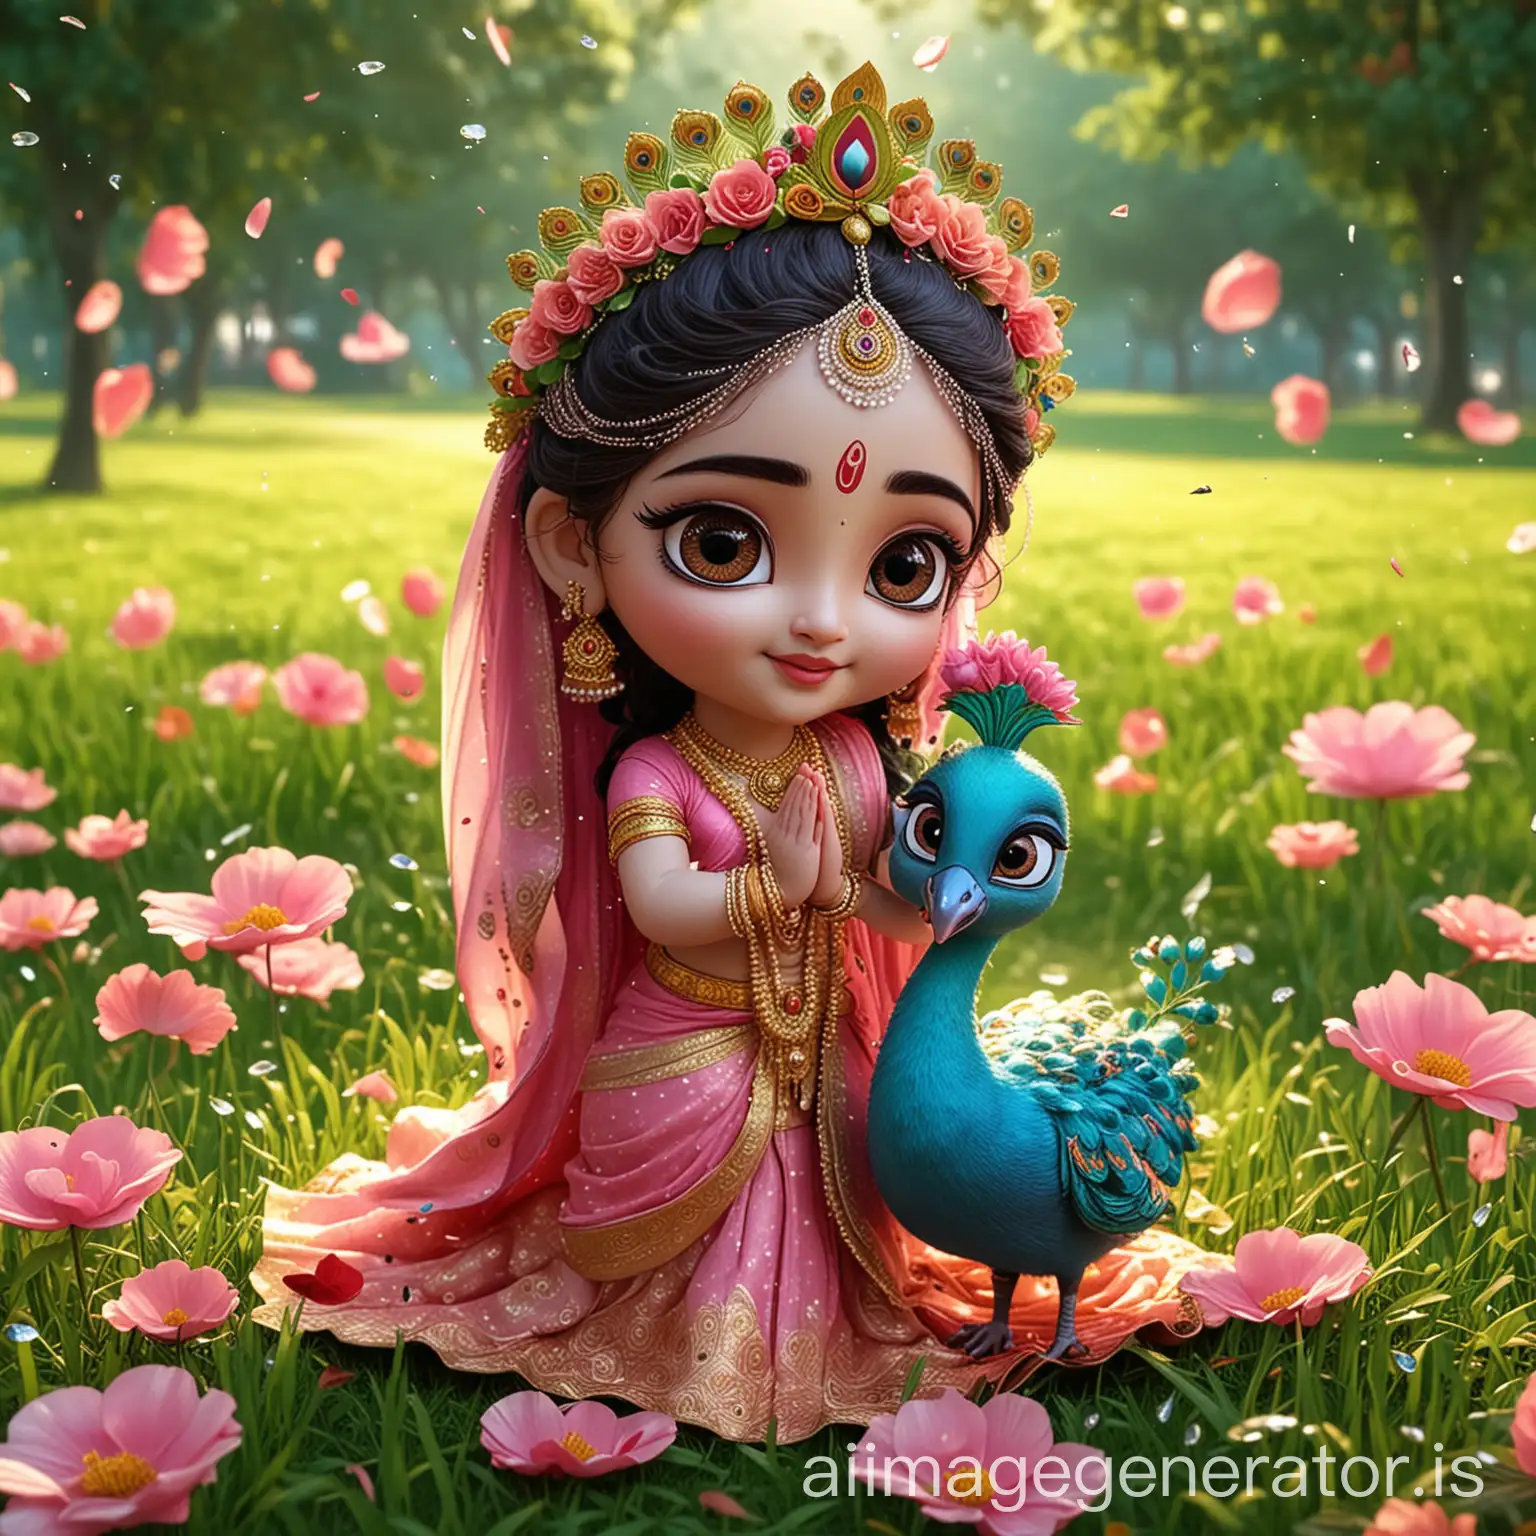 sri krishna holdin the hands of Radha , the rose petals are falling they are standing on grass they are with cute face big eyes in animation , on head of Krishna there is a peacock feather